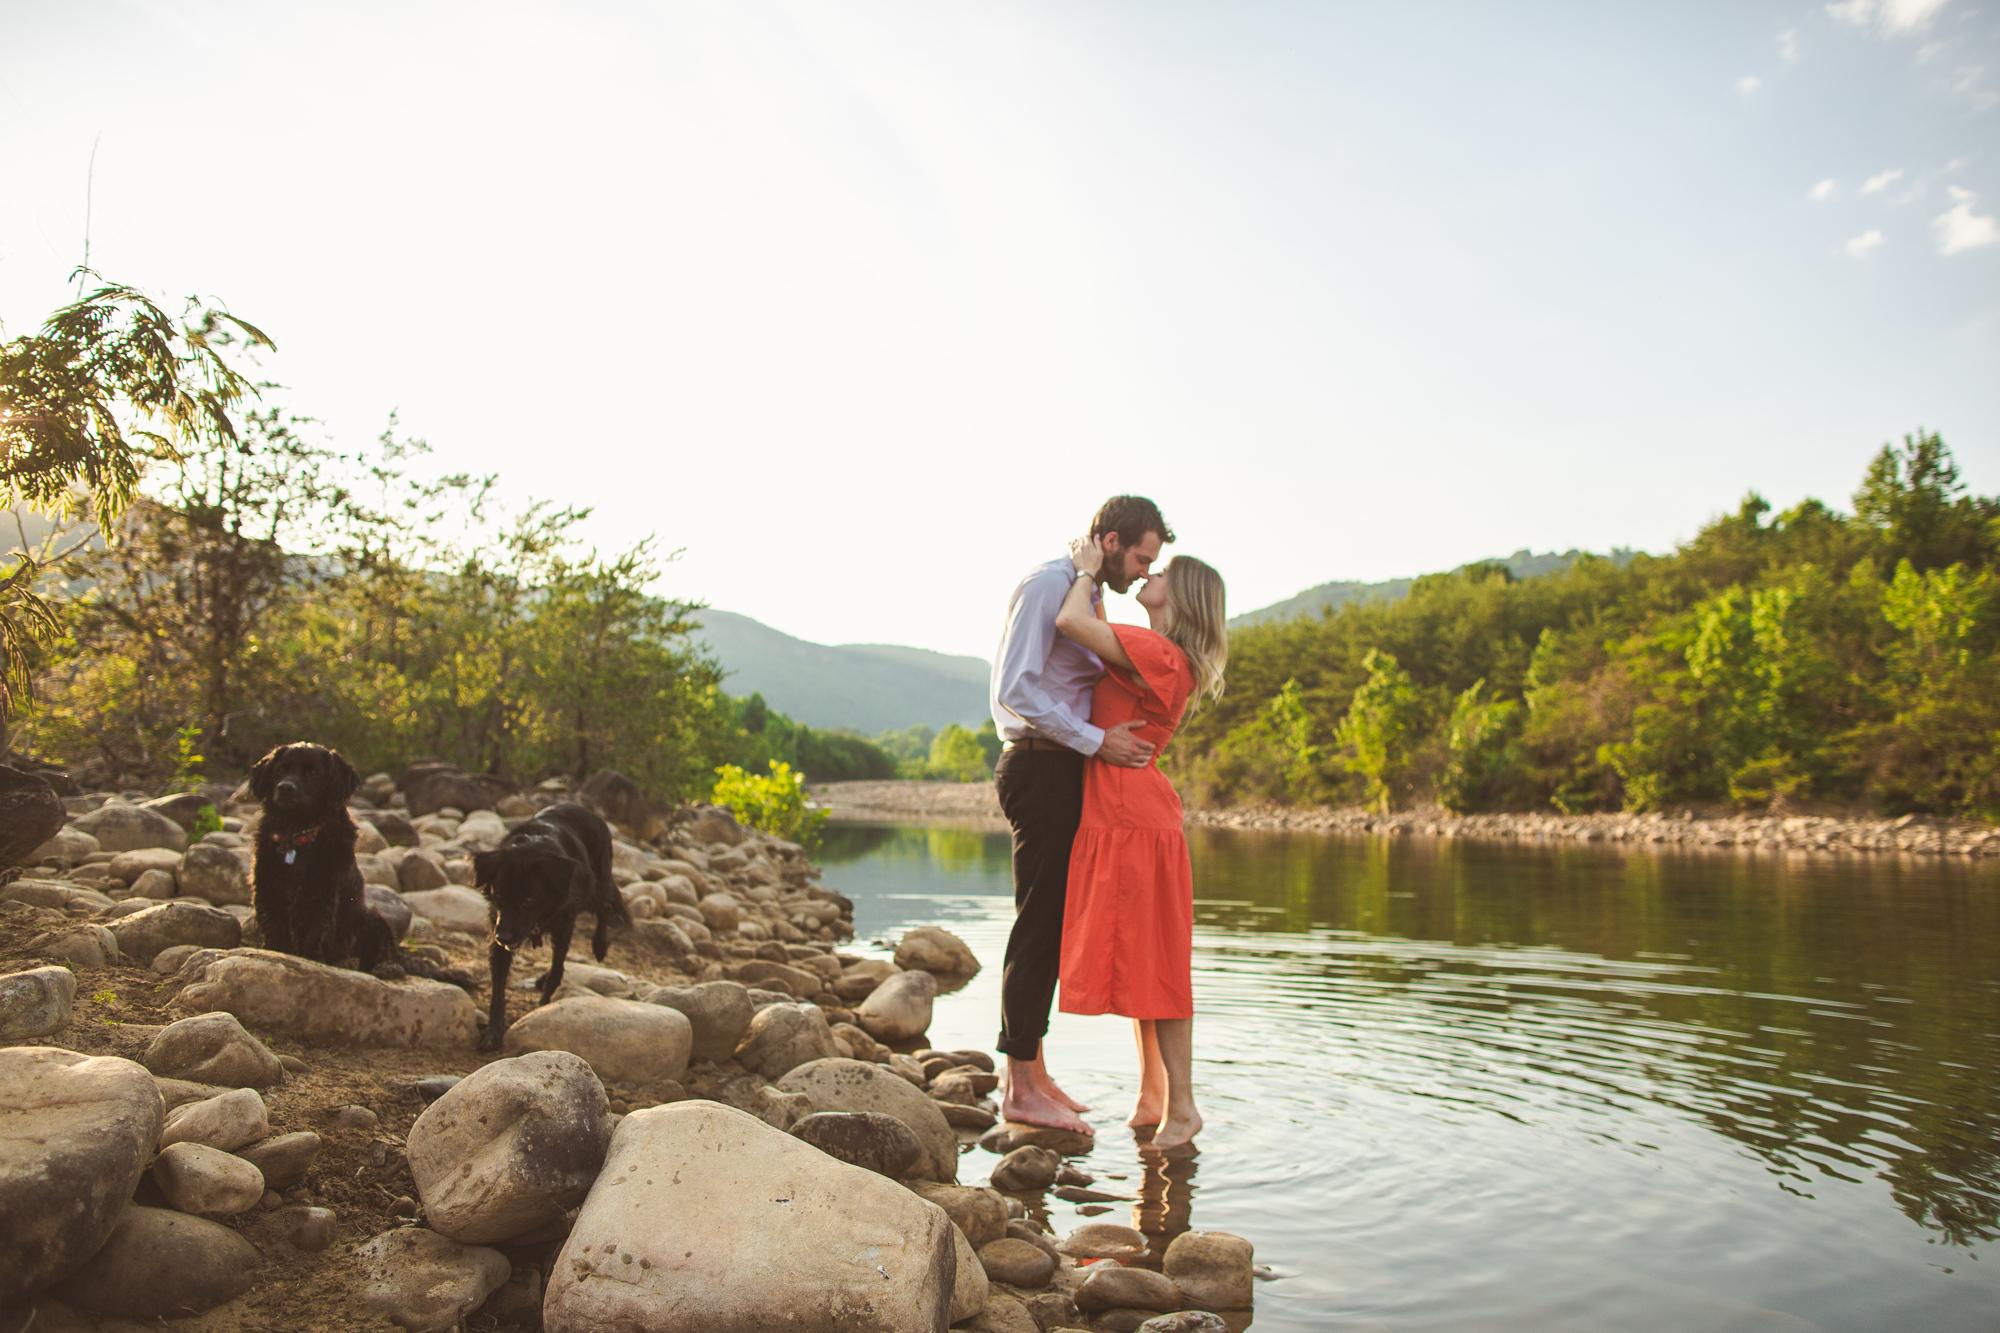 The Wedding Website of Cassie Price and Zach Agee